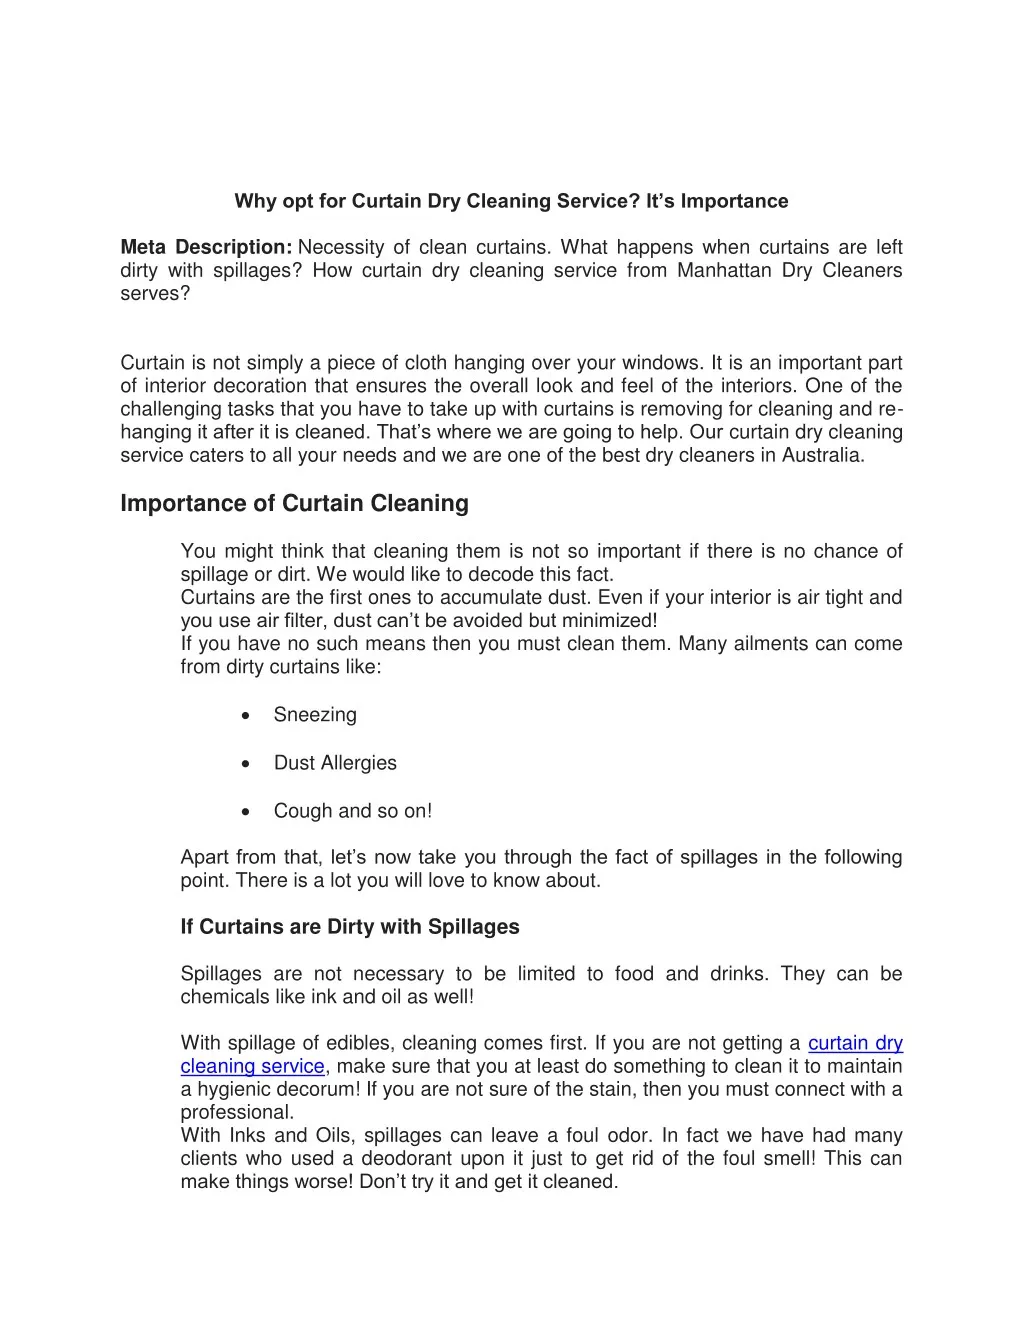 why opt for curtain dry cleaning service